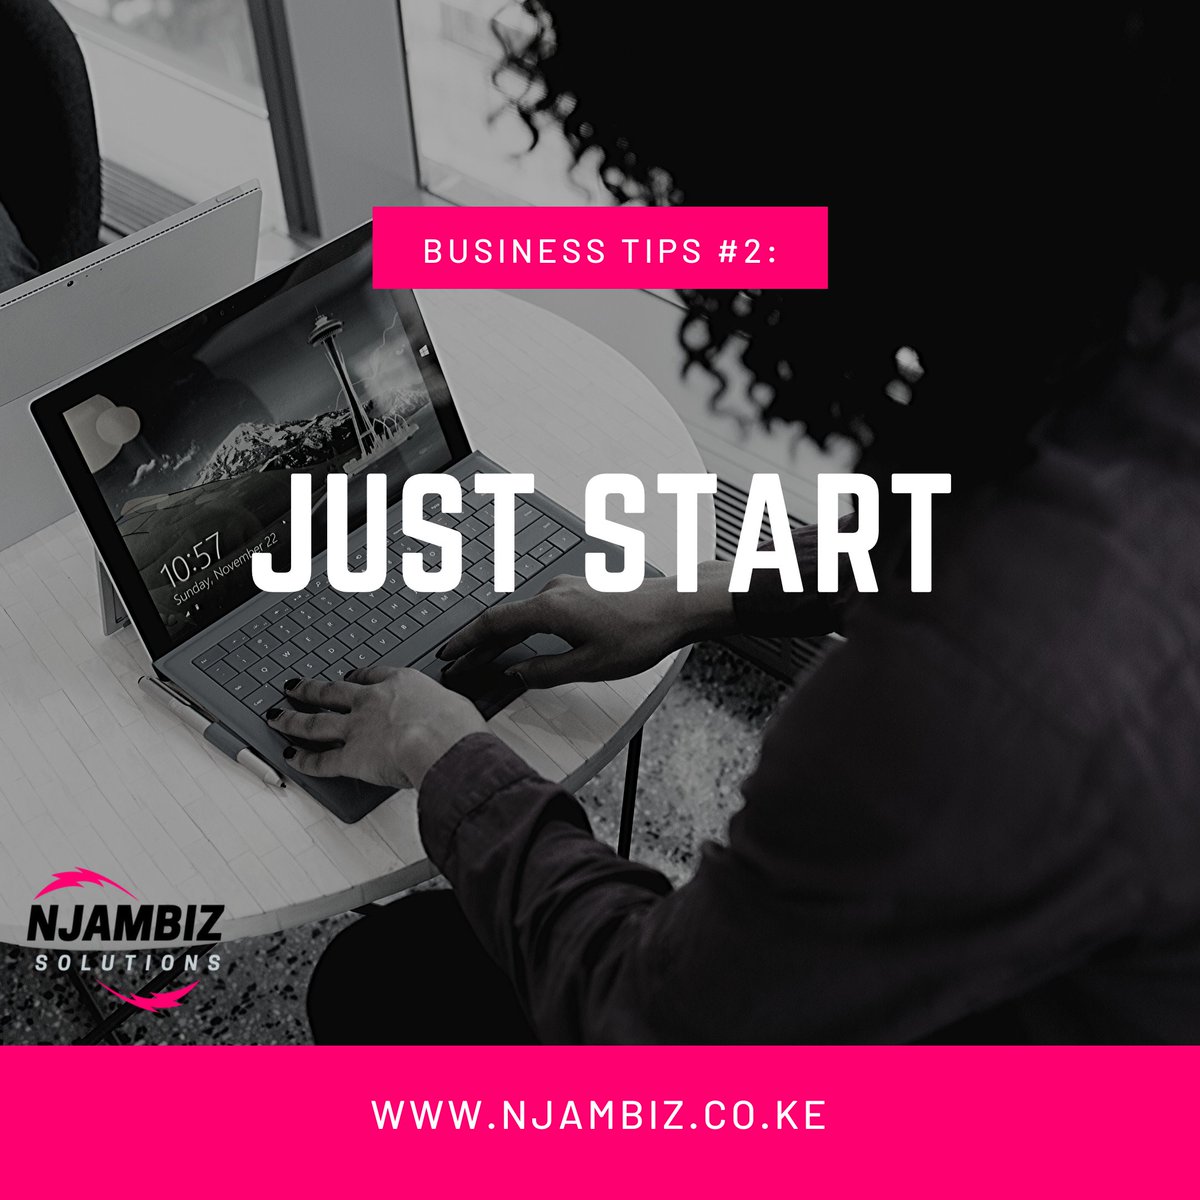 Don't wait for the perfect time or situation to get your #business up and running; just start. You will learn and grow as you go....#entrepreneur #entrepreneurship #businesstips #entrepreneurtips #mondaymotivation #mondathoughts #Njambizsolutions